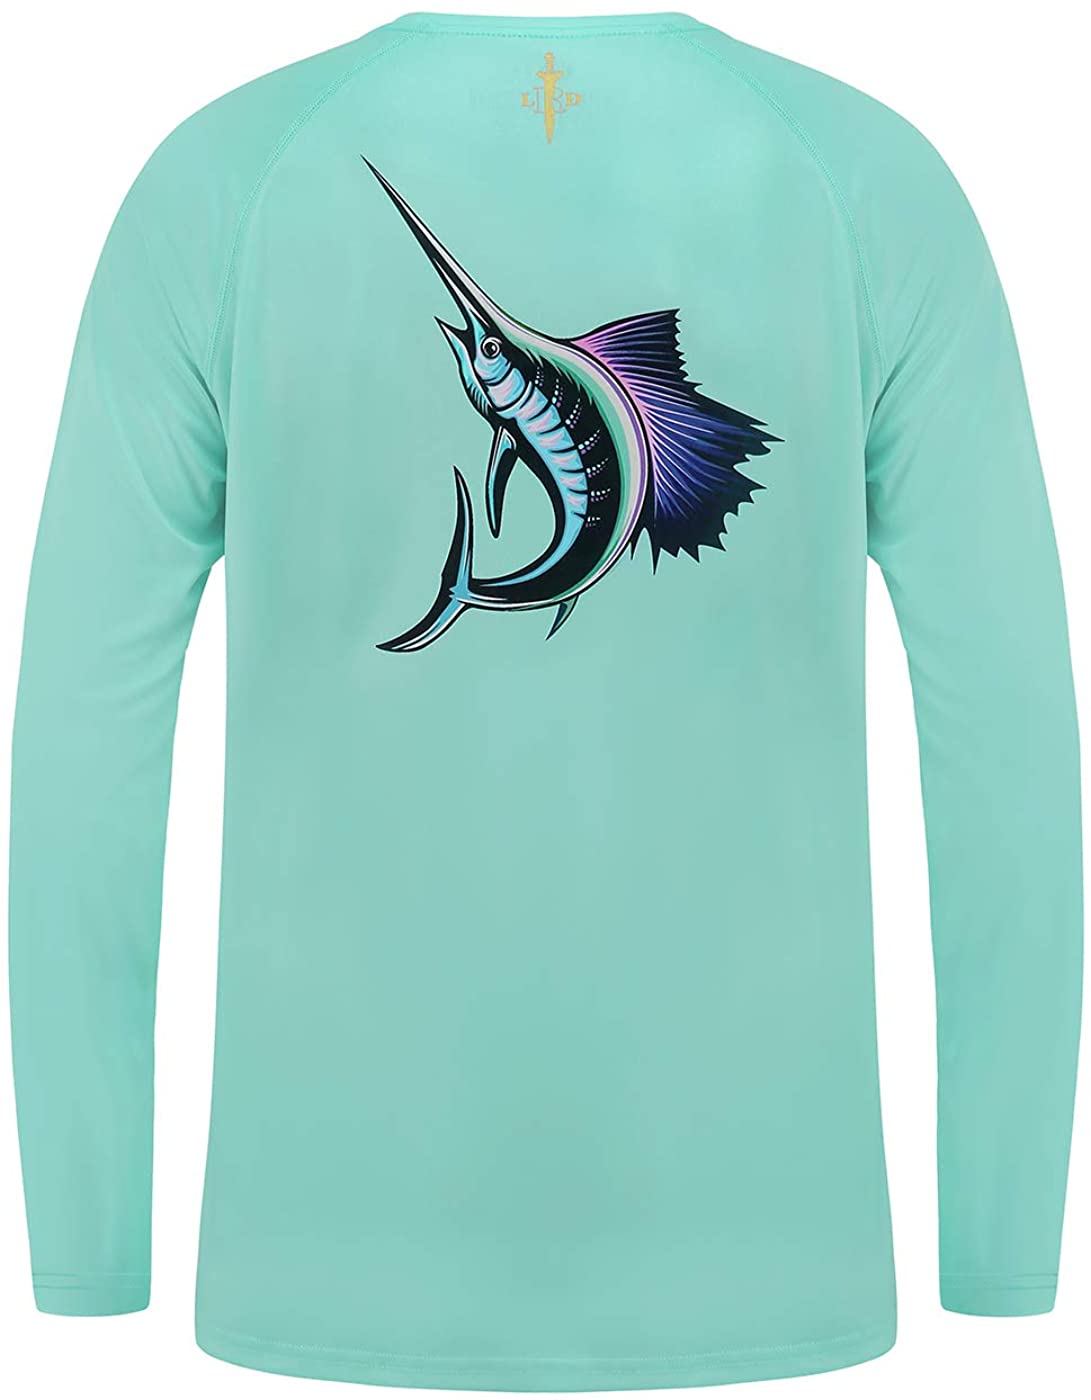 HDE Fishing Shirts for Men Long Sleeve UPF 50 Sun Protection Quick-Dry Outdoor Performance T-Shirt